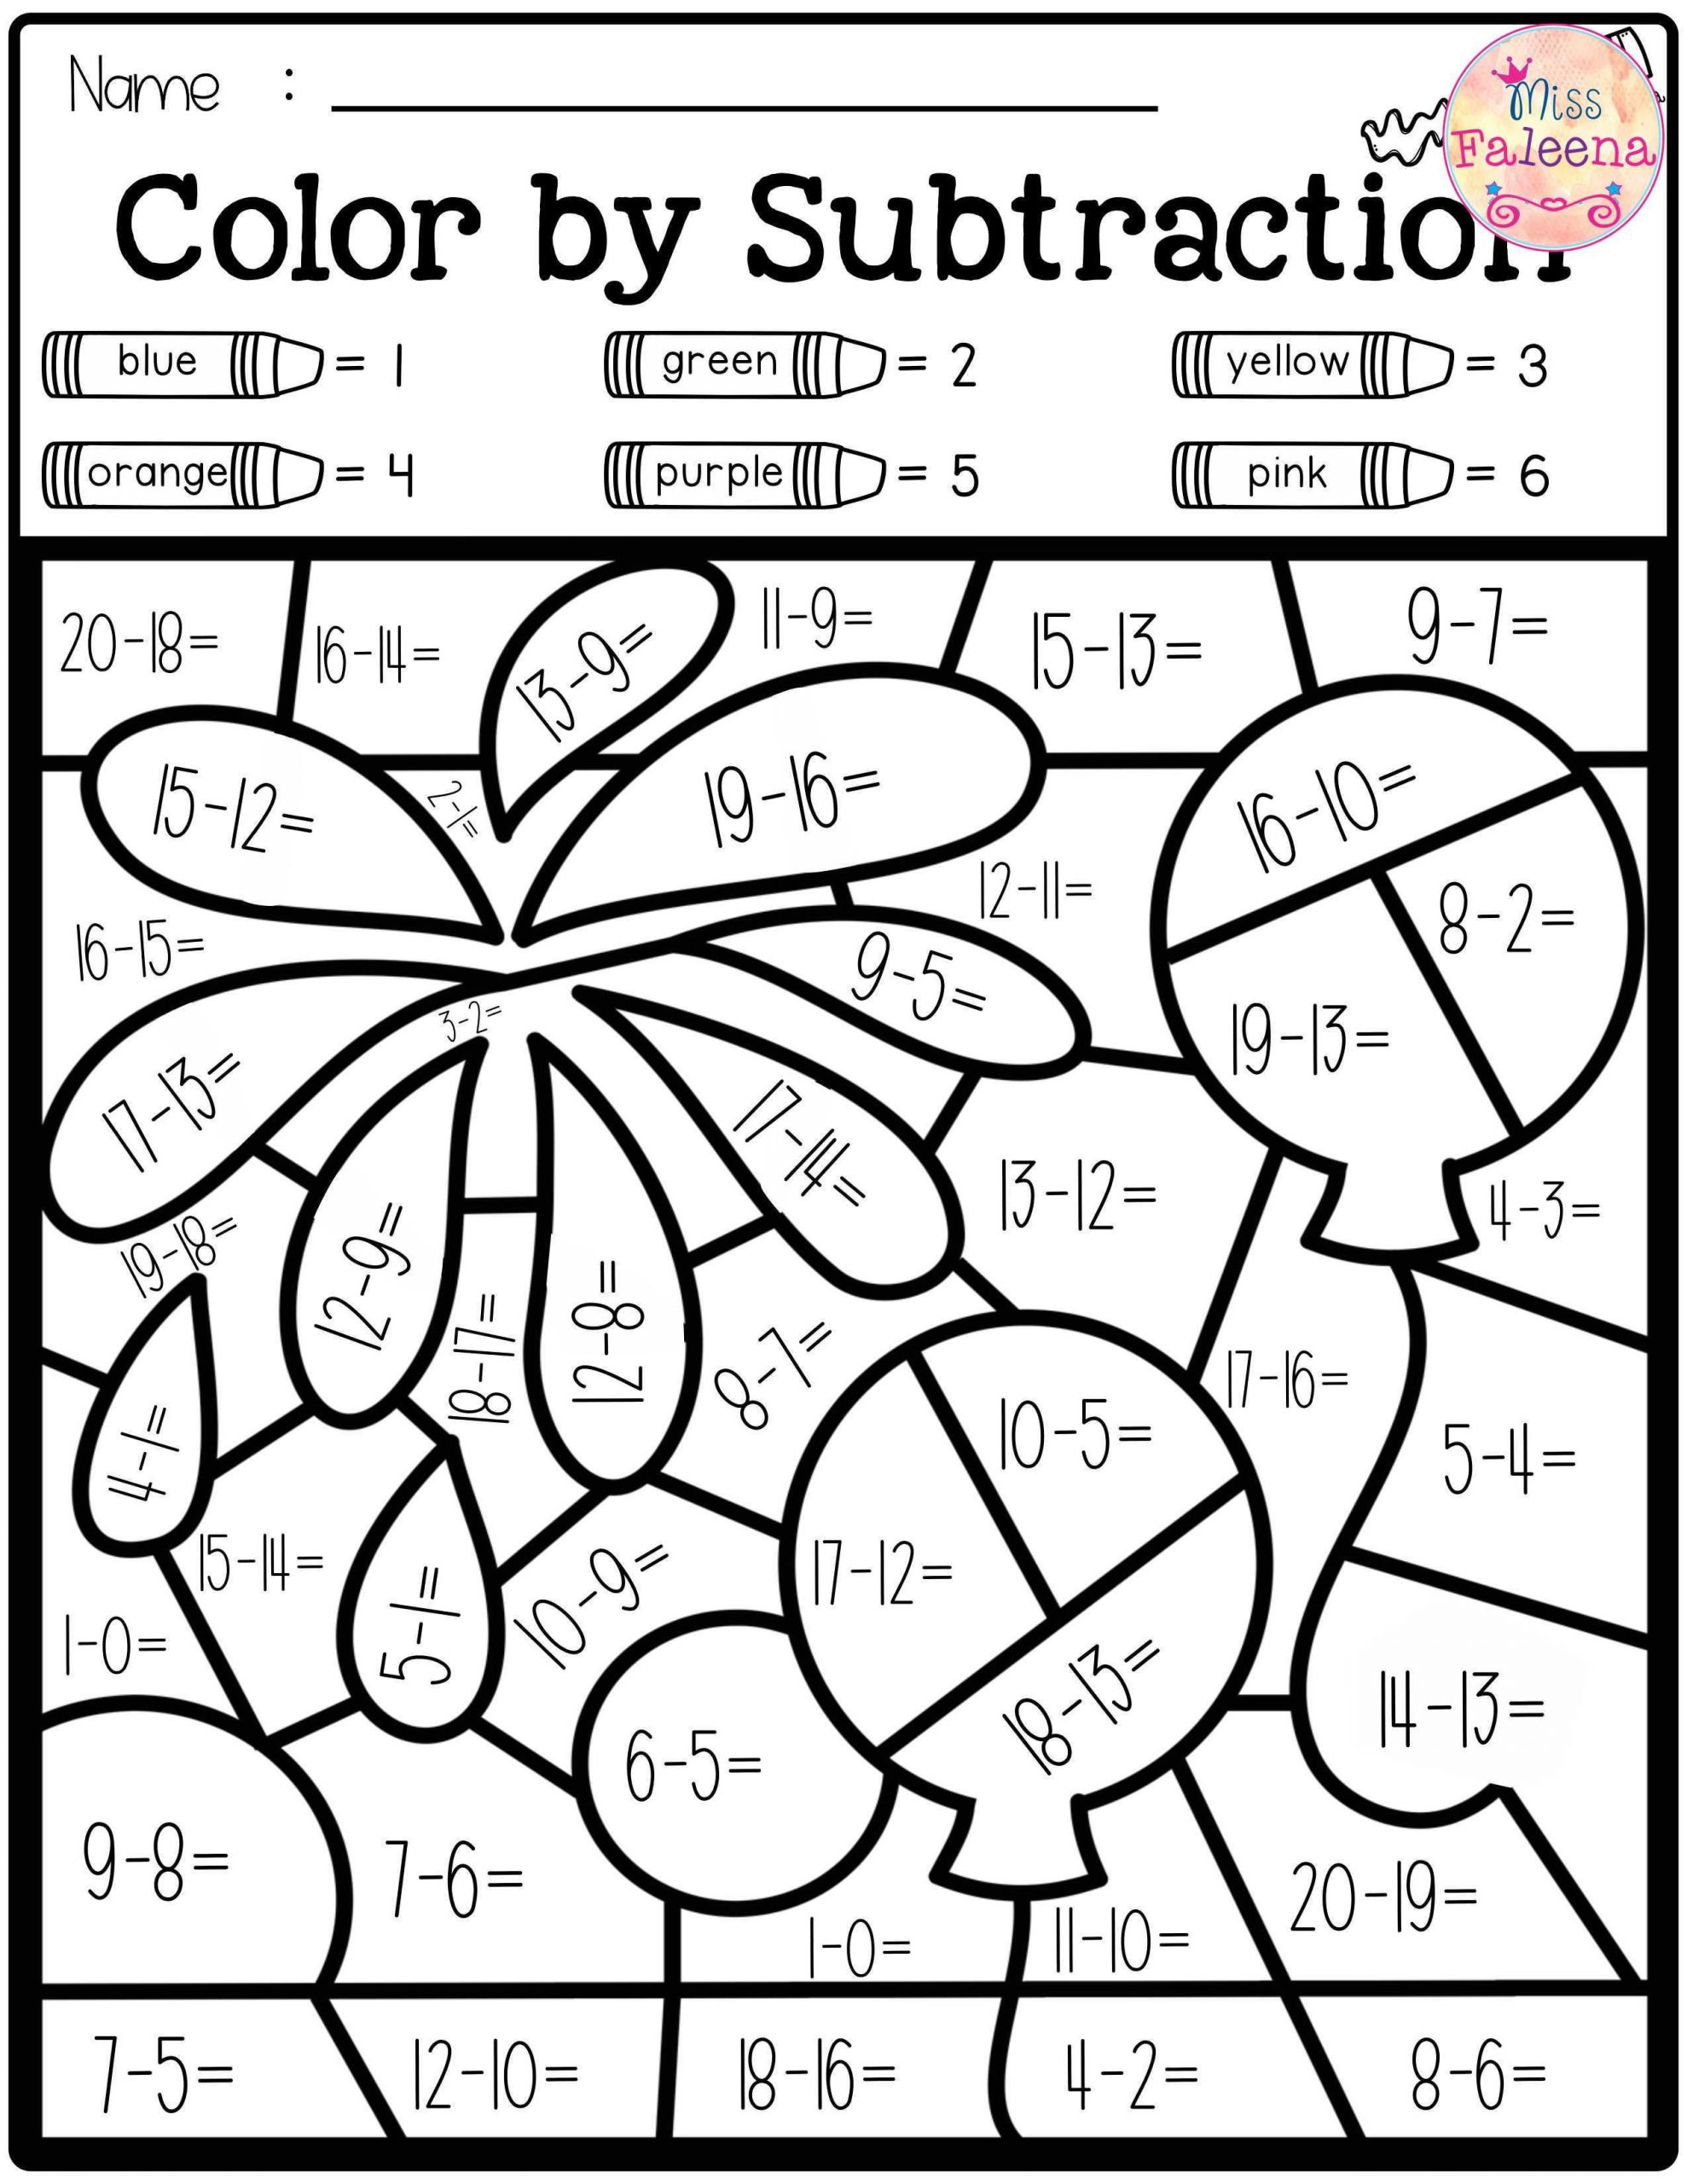 Free Math Worksheets Fourth Grade 4 Addition Adding 3 Digit and 1 Digit Numbers